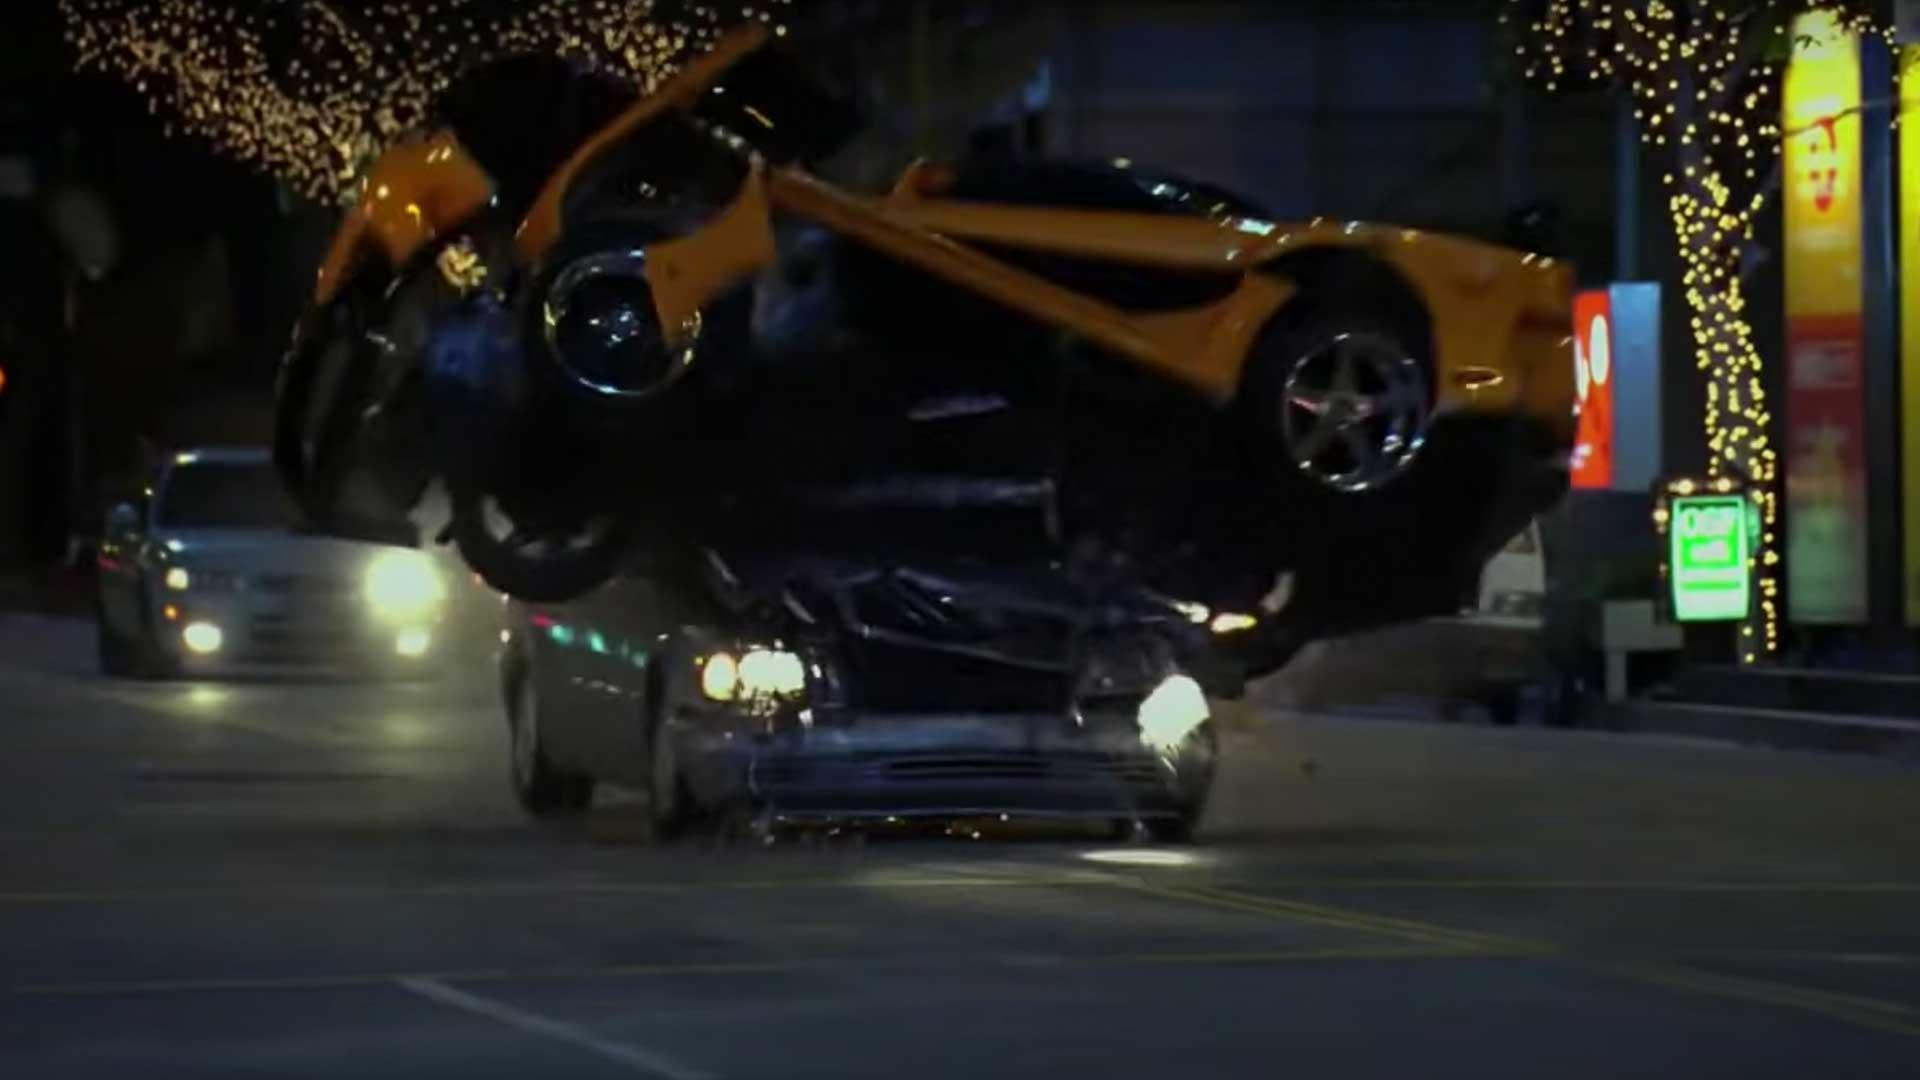 Filmauto's in The Fast and Furious: Tokyo Drift